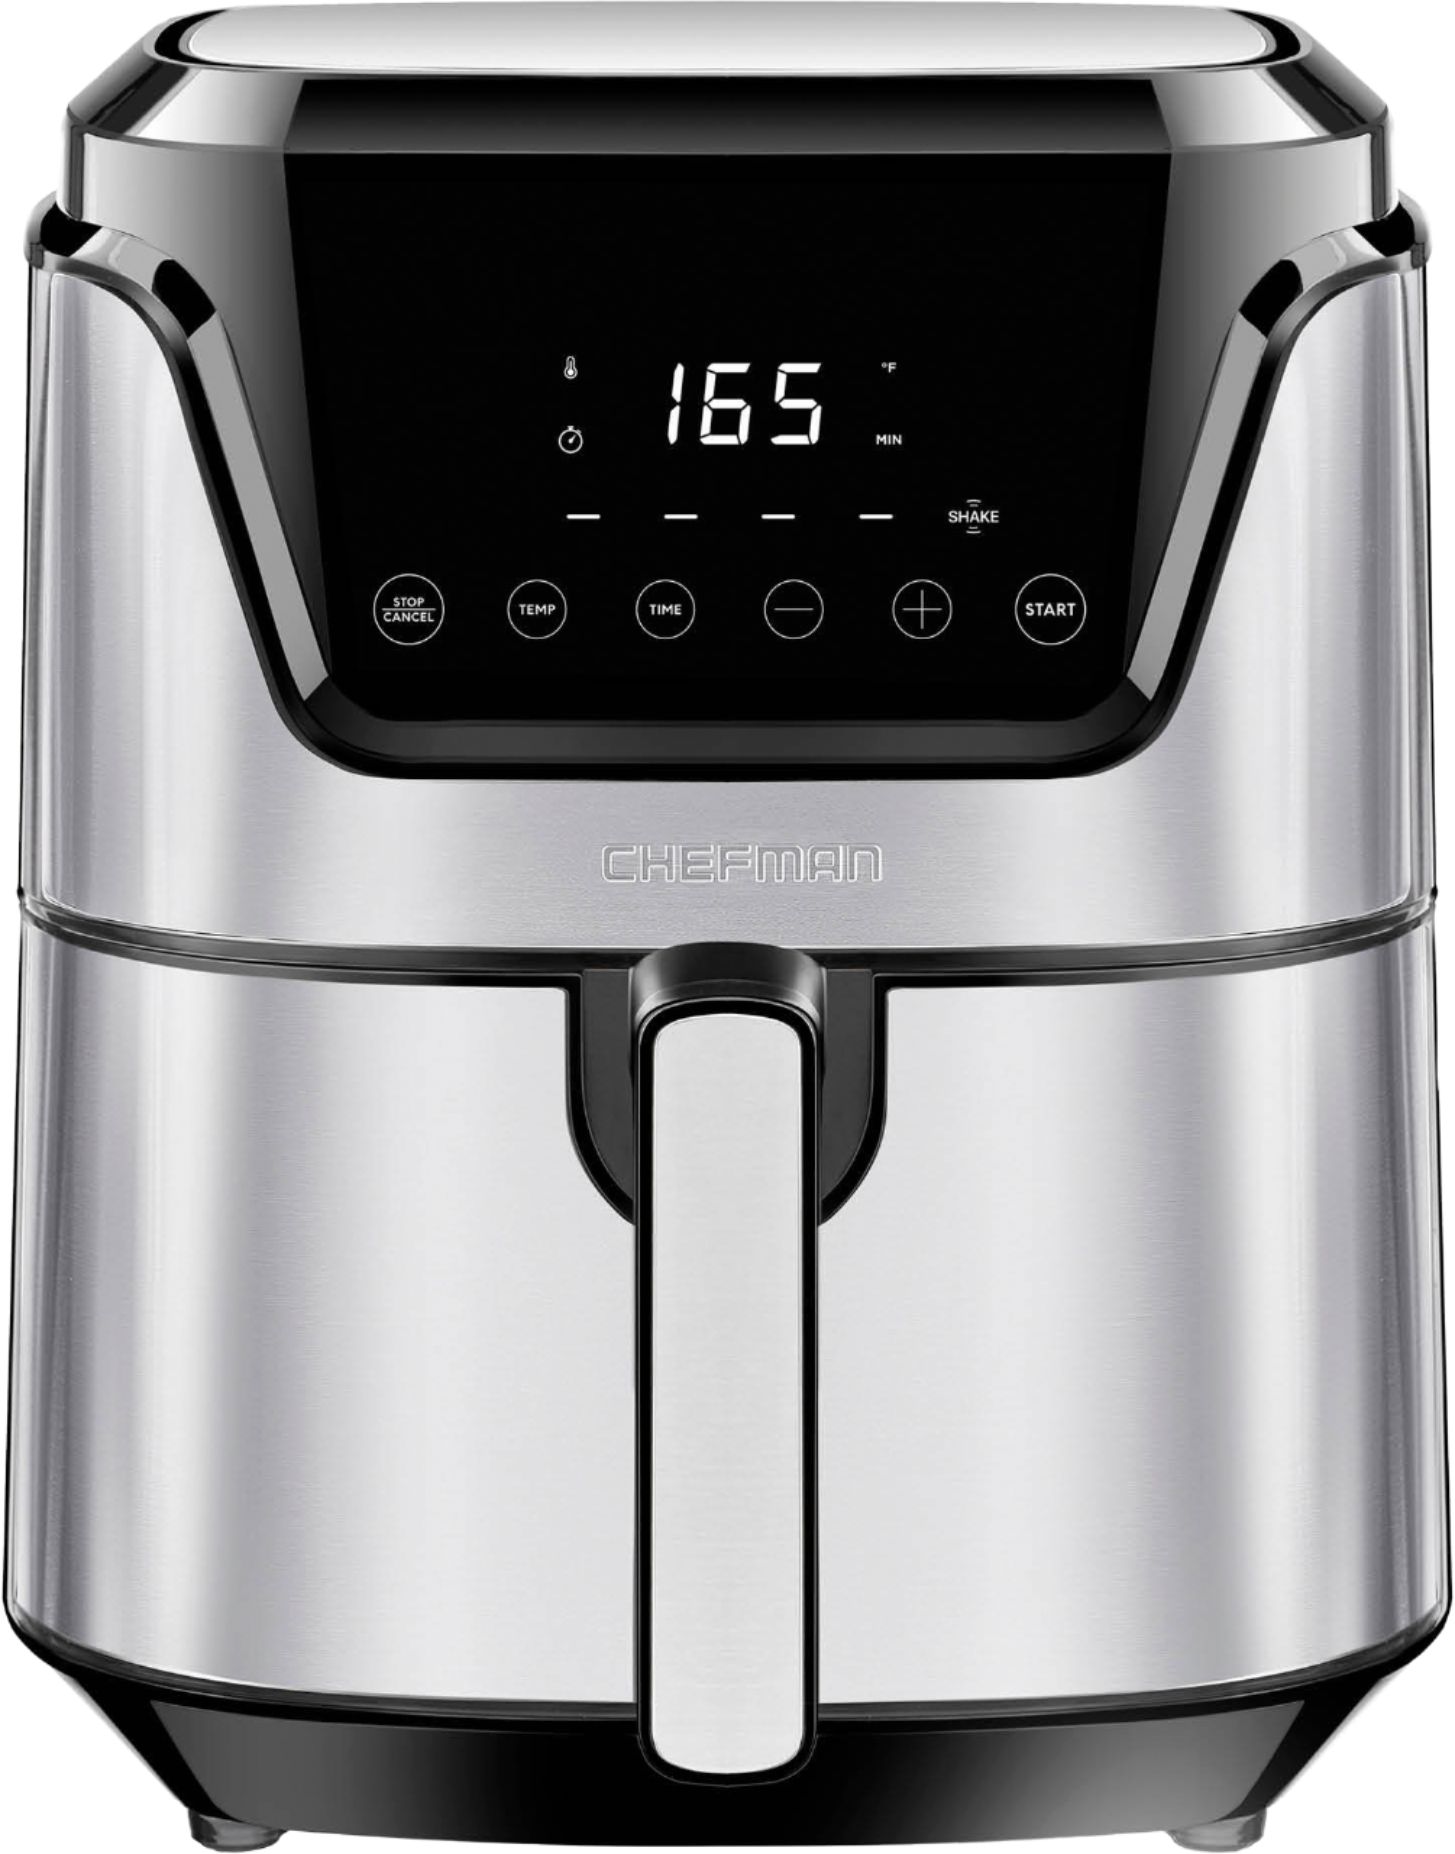 Compare CHEFMAN - TurboFry Touch 4.5 Qt Digital Air Fryer – Silver Chefman Turbofry Stainless Steel Air Fryer